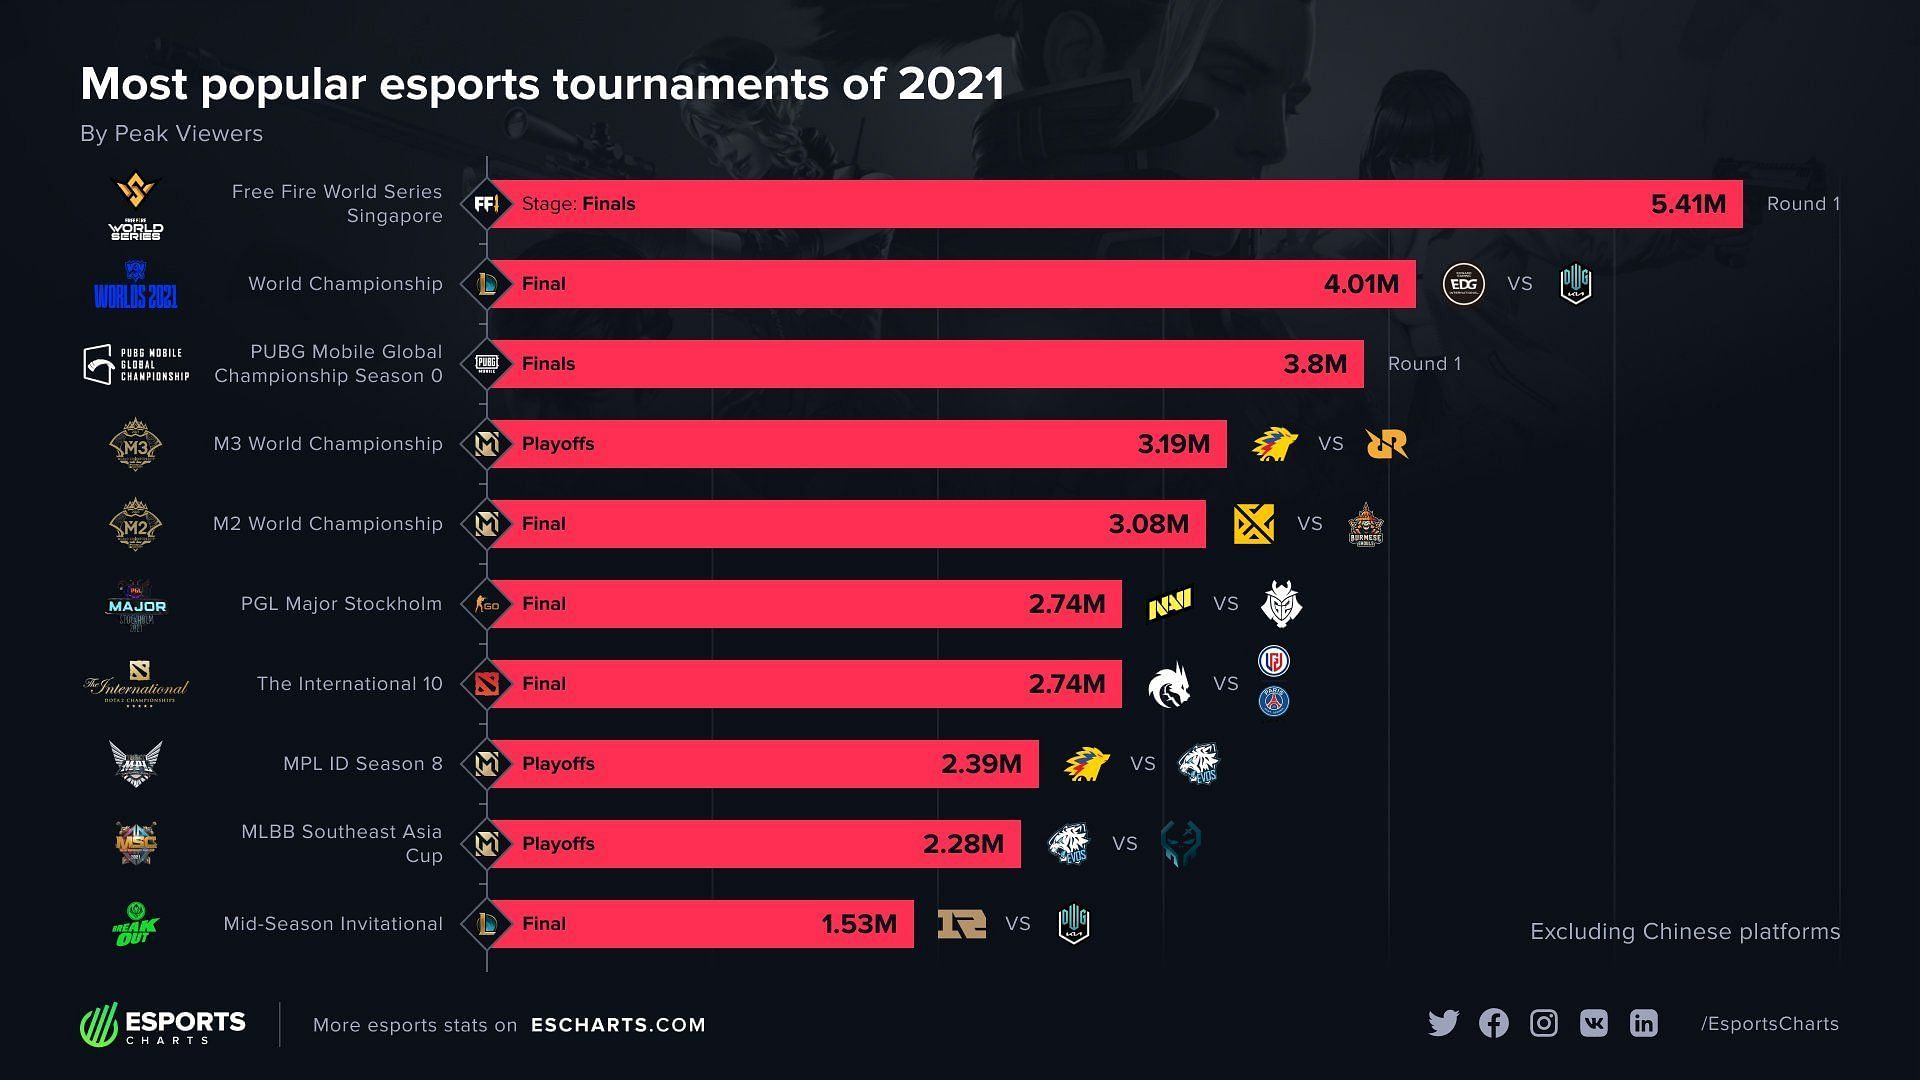 Top 10 Most popular esports tournaments by Peak viewership in 2021 (Image via Esports Chart)